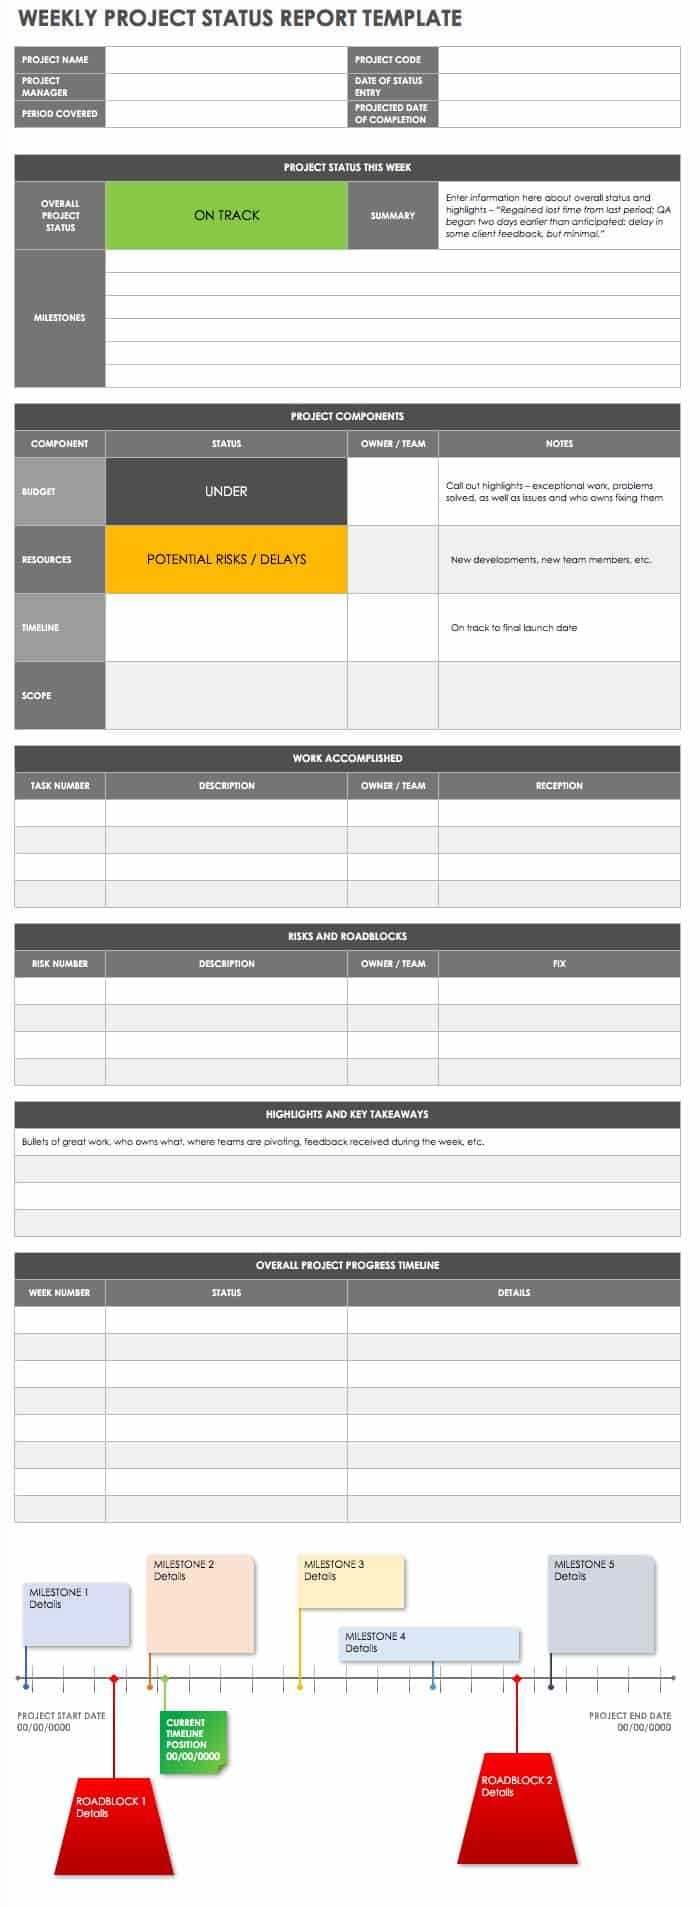 Free Project Report Templates | Smartsheet For Progress Report Template For Construction Project